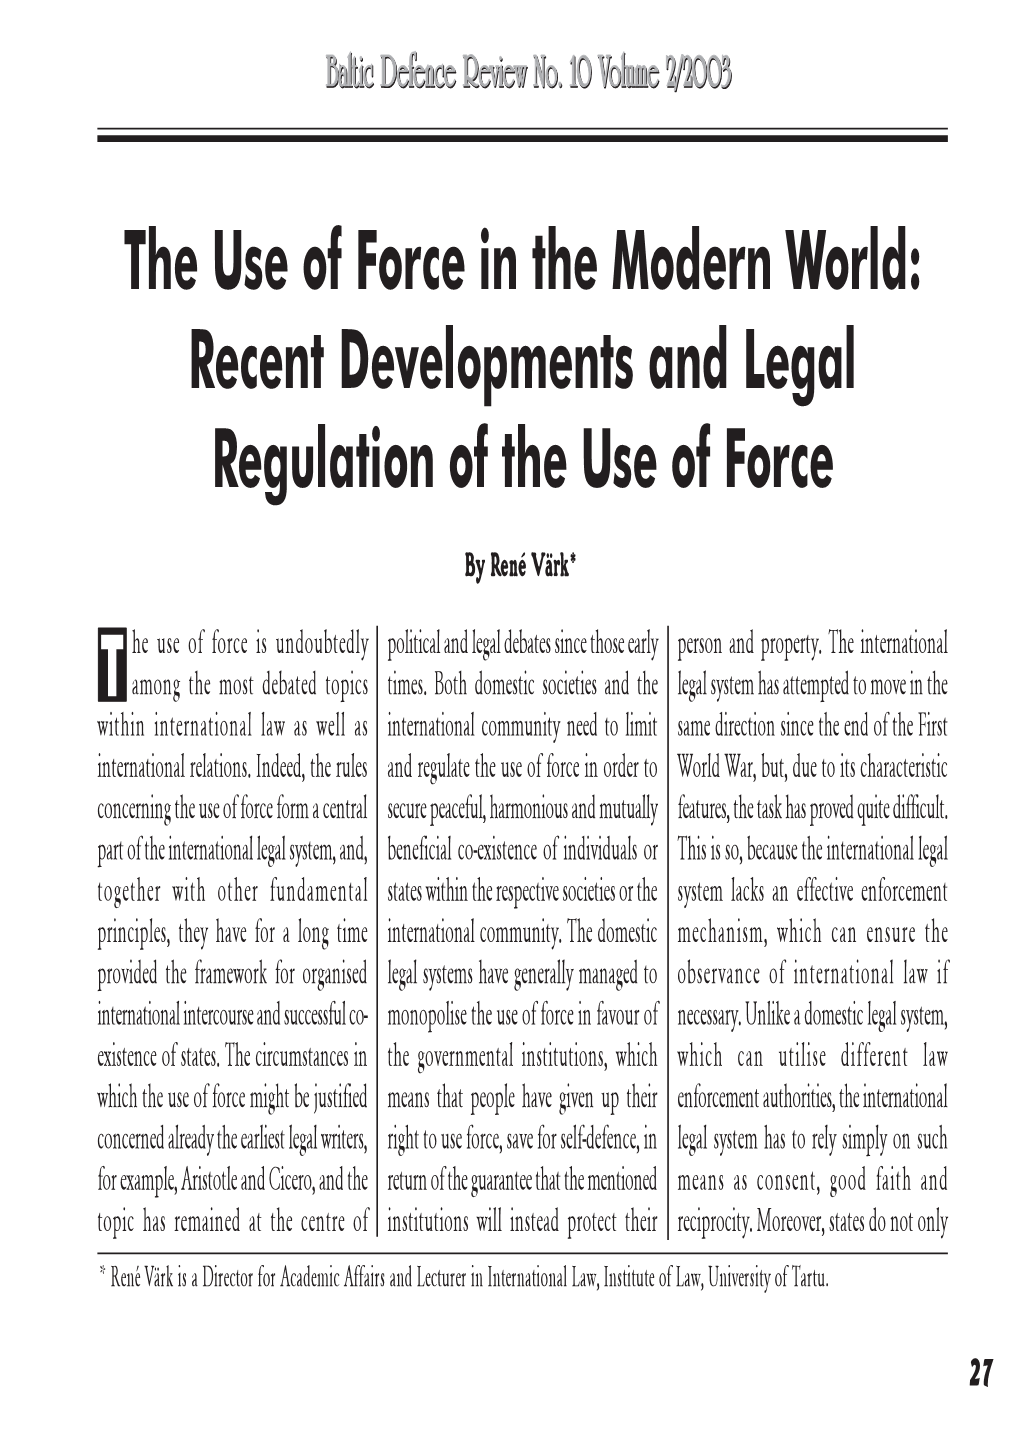 Recent Developments and Legal Regulation of the Use of Force